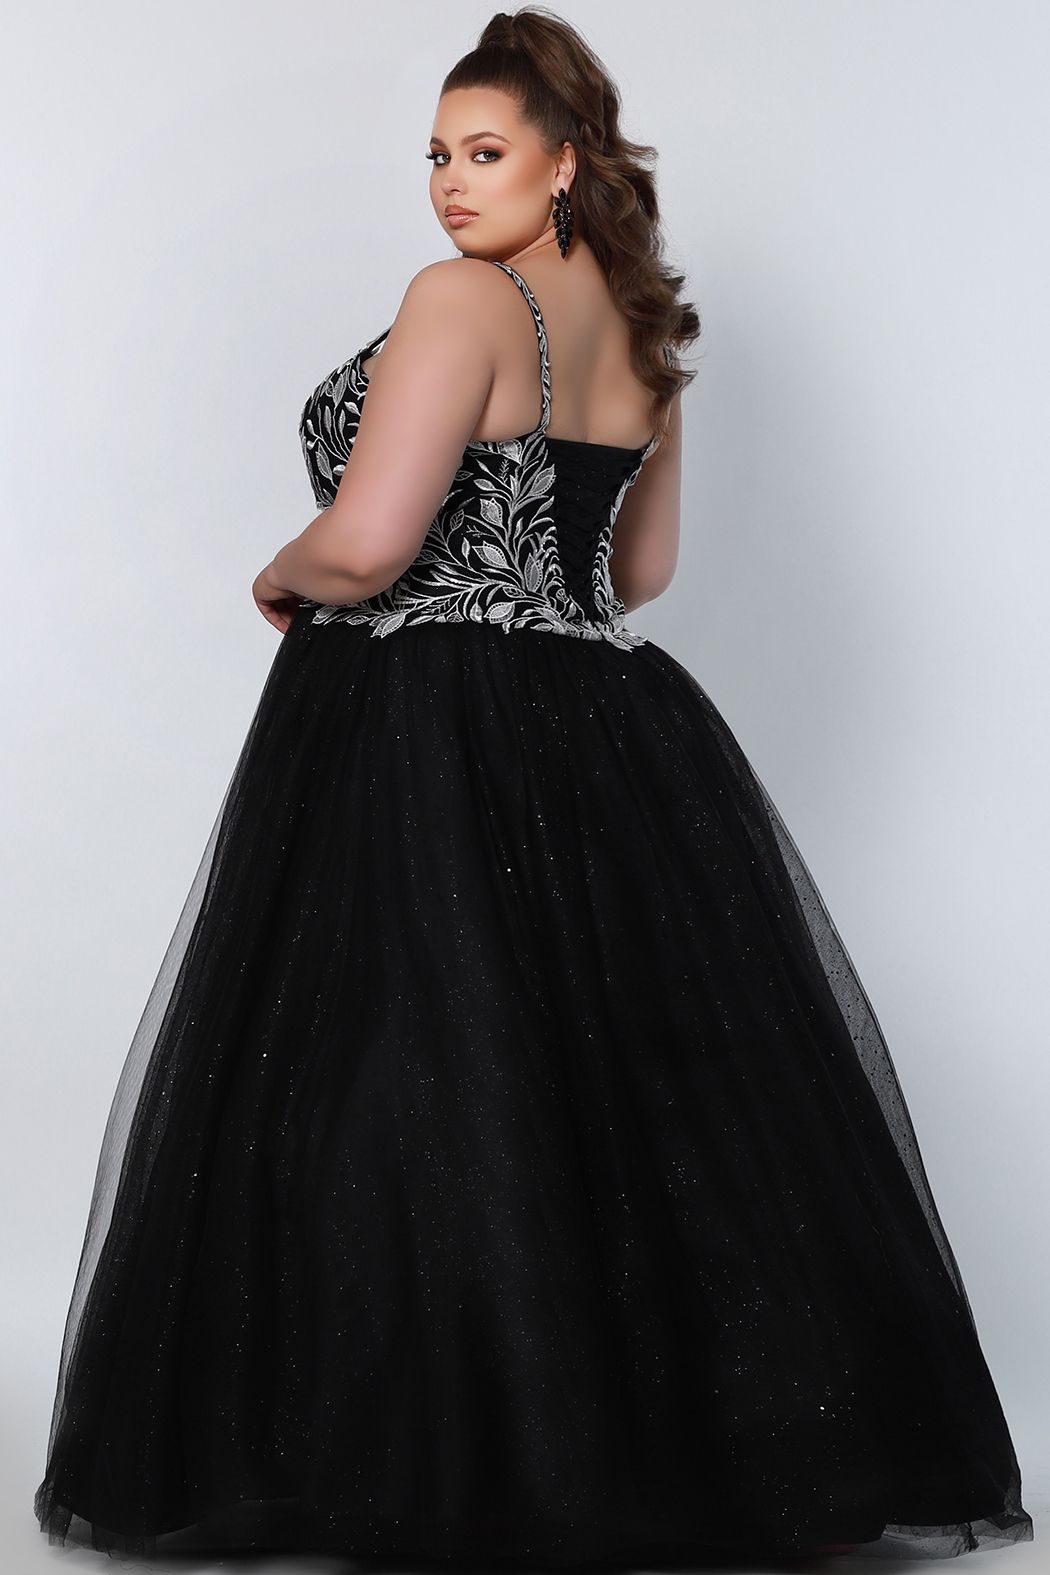 Sydney's Closet SC7329 This prom dress is full of romantic design details from the sweetheart neckline, white embroidered lace appliques, and lace-up back with modesty panel. A voluminous ball gown skirt completes the fairytale with layered tulle and glitter tulle.  Available colors:  Black, Platinum, Royal, Red  Available sizes:  14-40